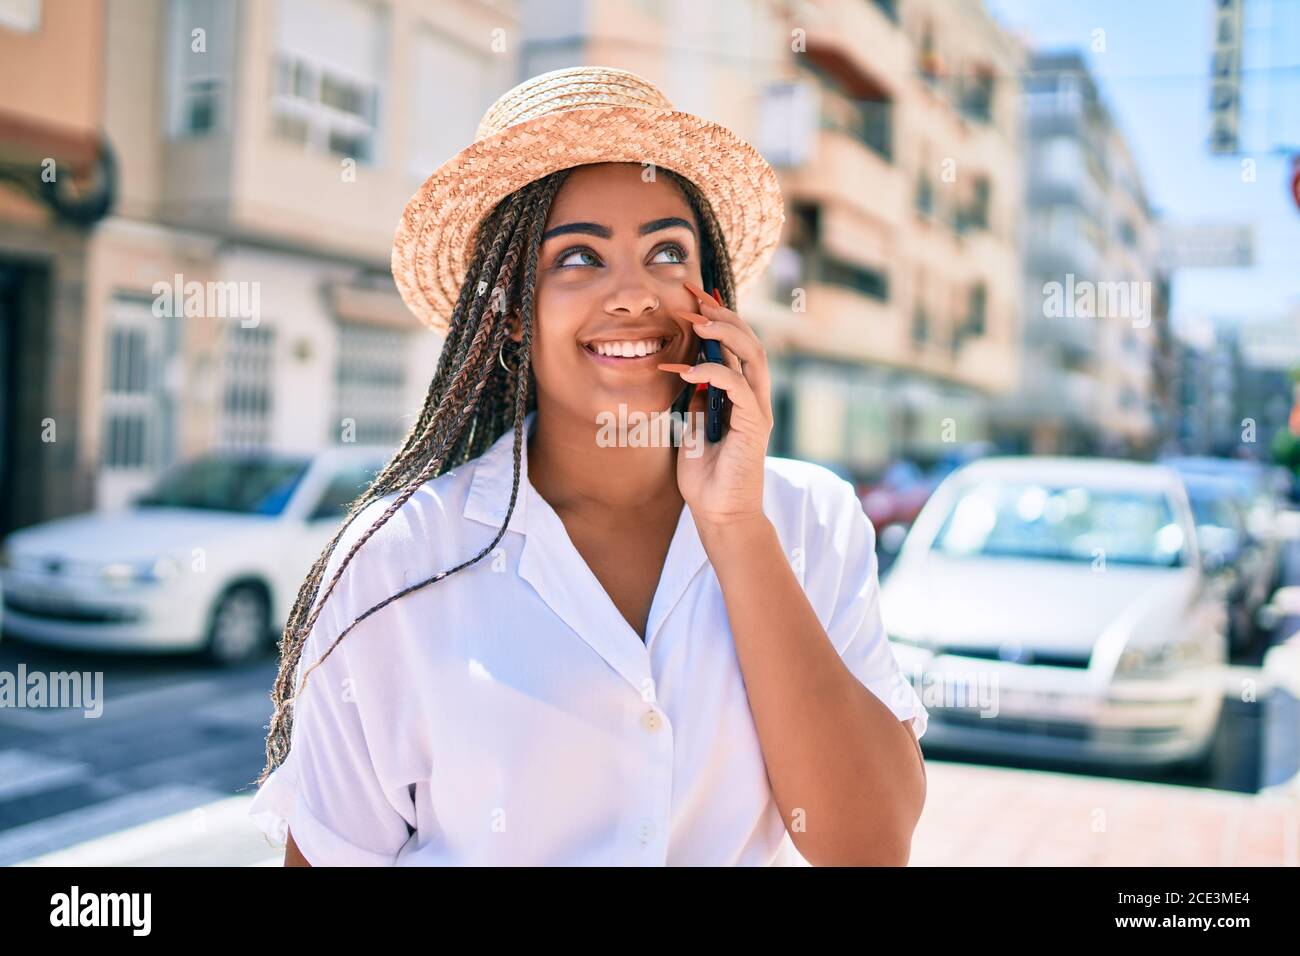 Young african american woman with braids smiling happy spaking on the phone outdoors on a sunny day of summer Stock Photo